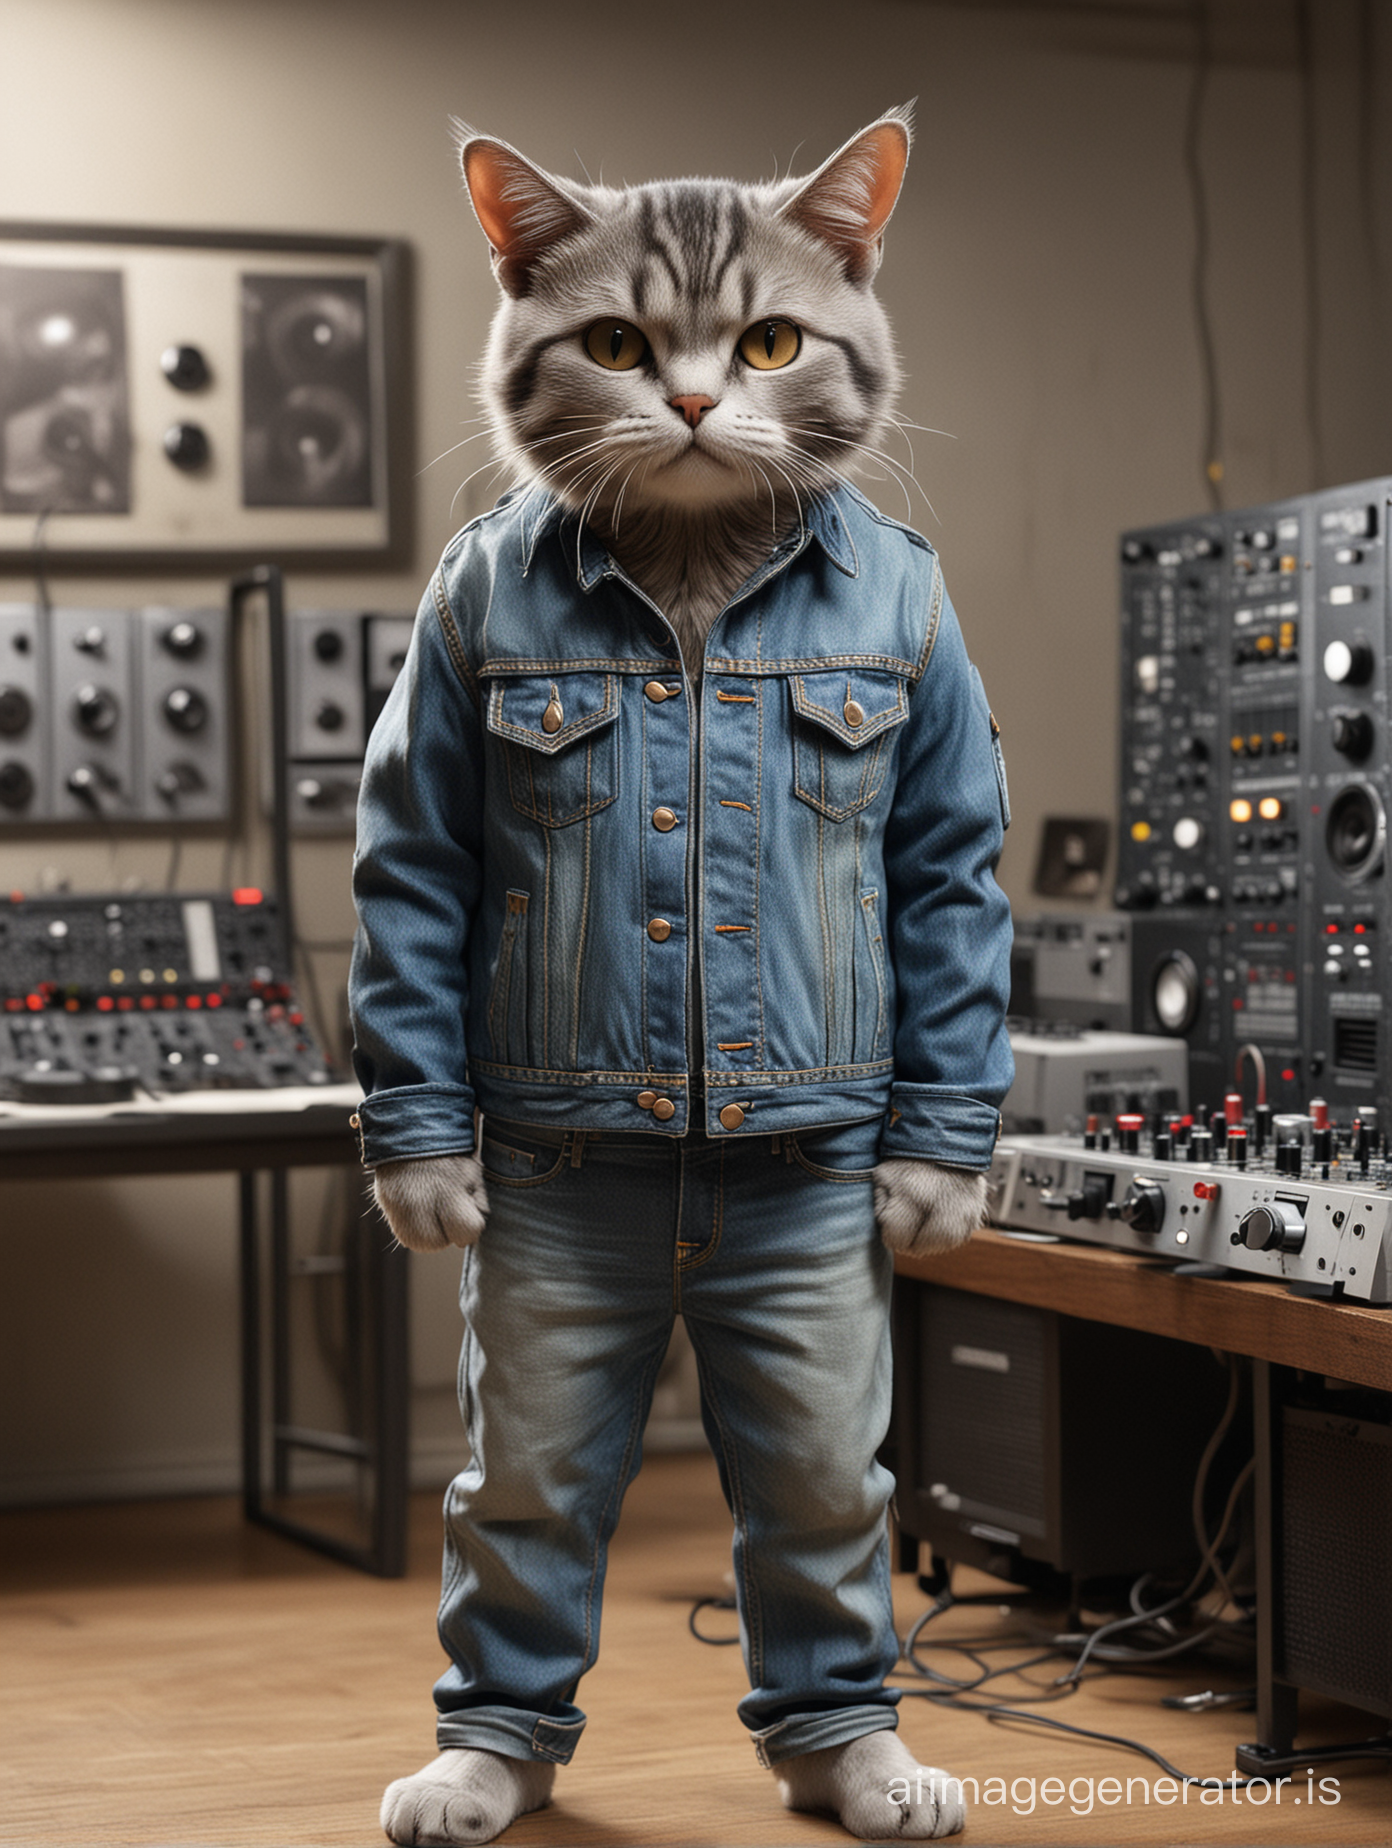  creat a cat who wear vintage jean jacket and stand front of people and work with DJ controler. show it like dj man in a boiler room. make cat like human and real. amke it more cool and show the standing figure. show the boiler room in back and add a guitar in his hand